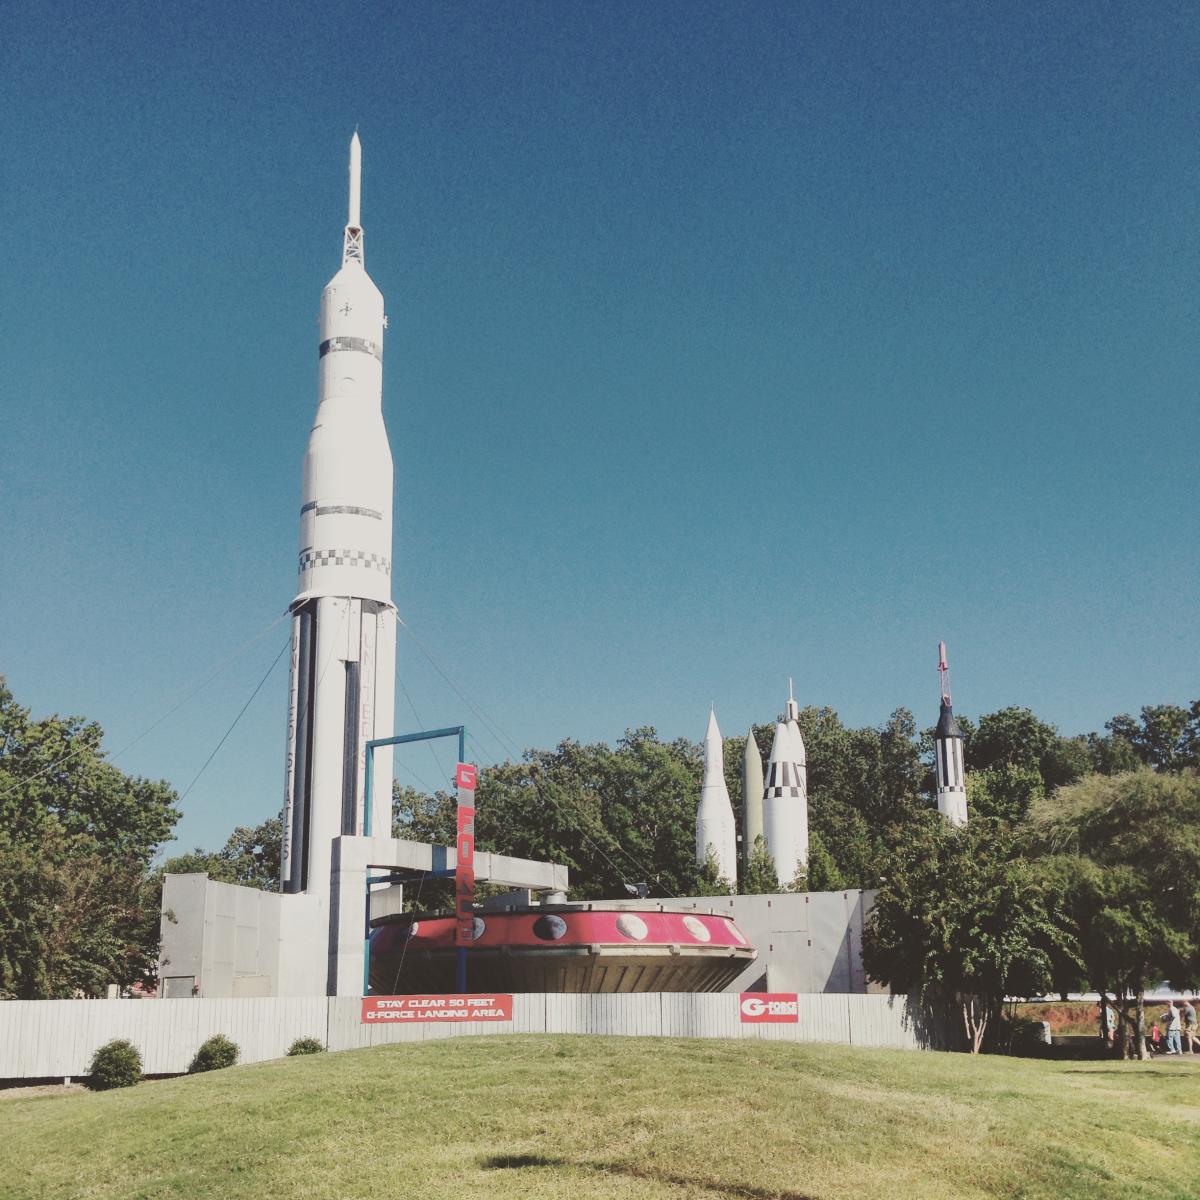 Rockets rise up behind the saucer-shaped U.S. Space and Rocket Center